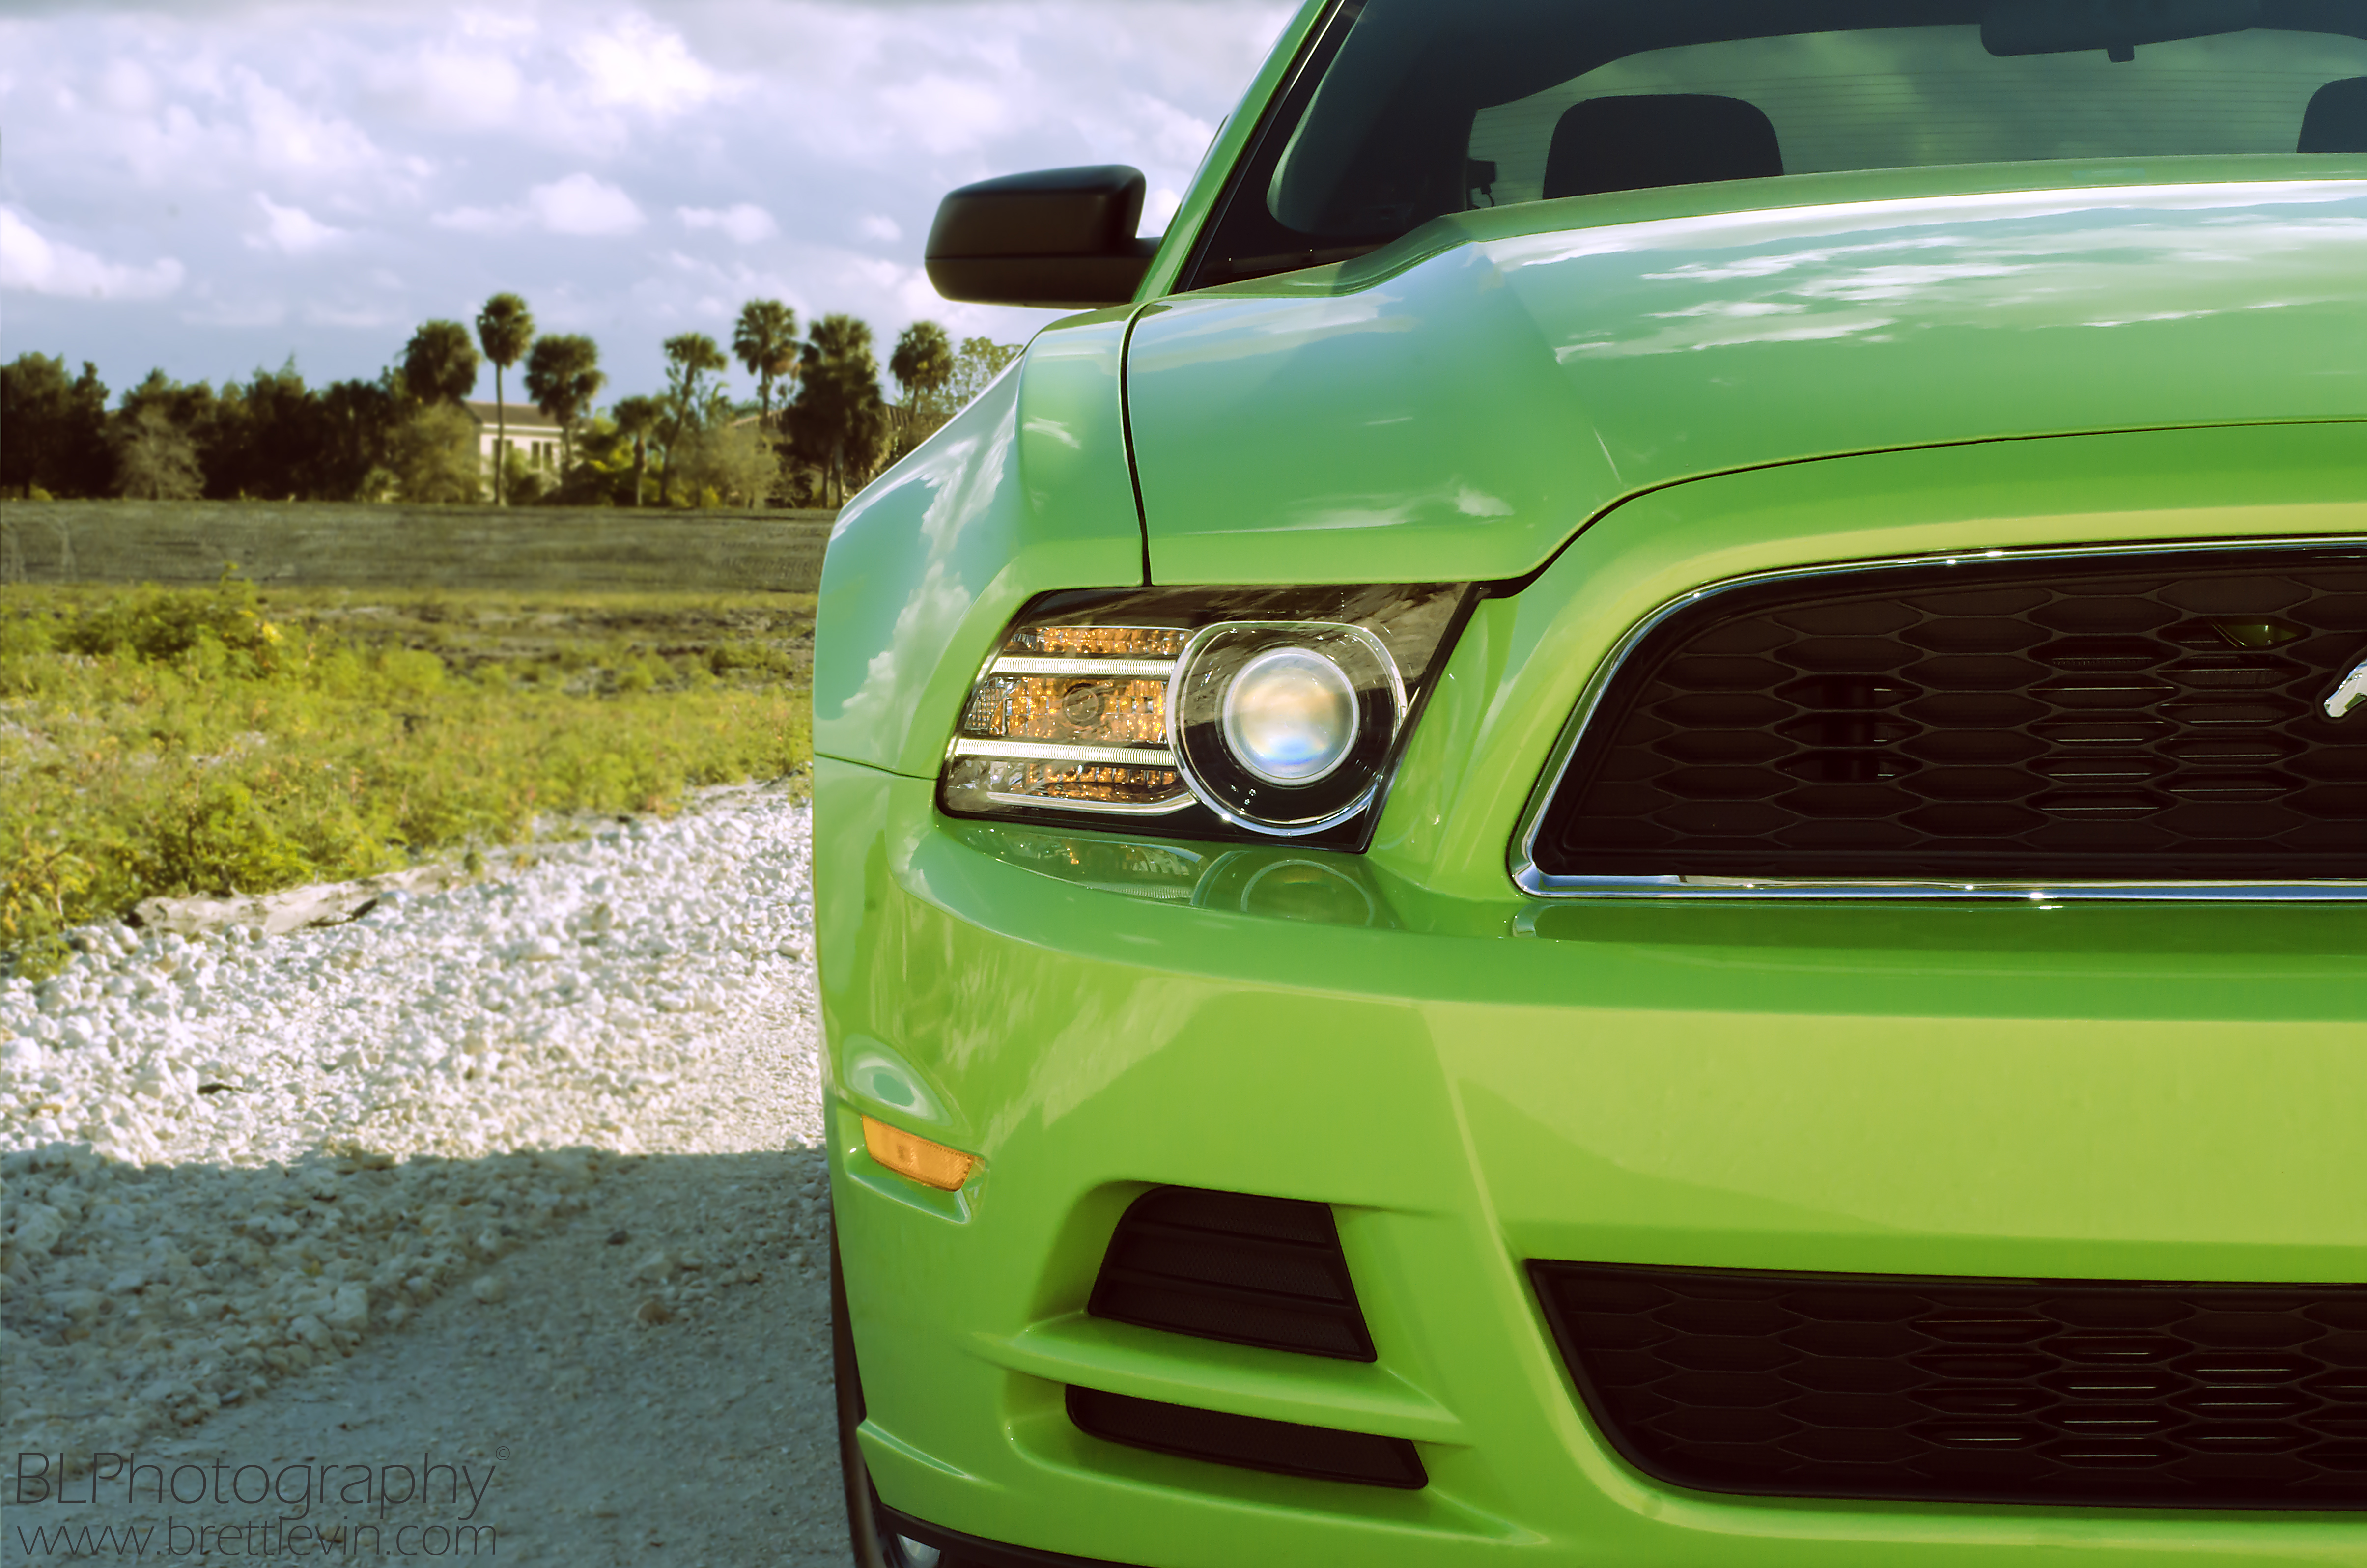 android sports car, ford mustang, headlight, green, sports, cars, front view